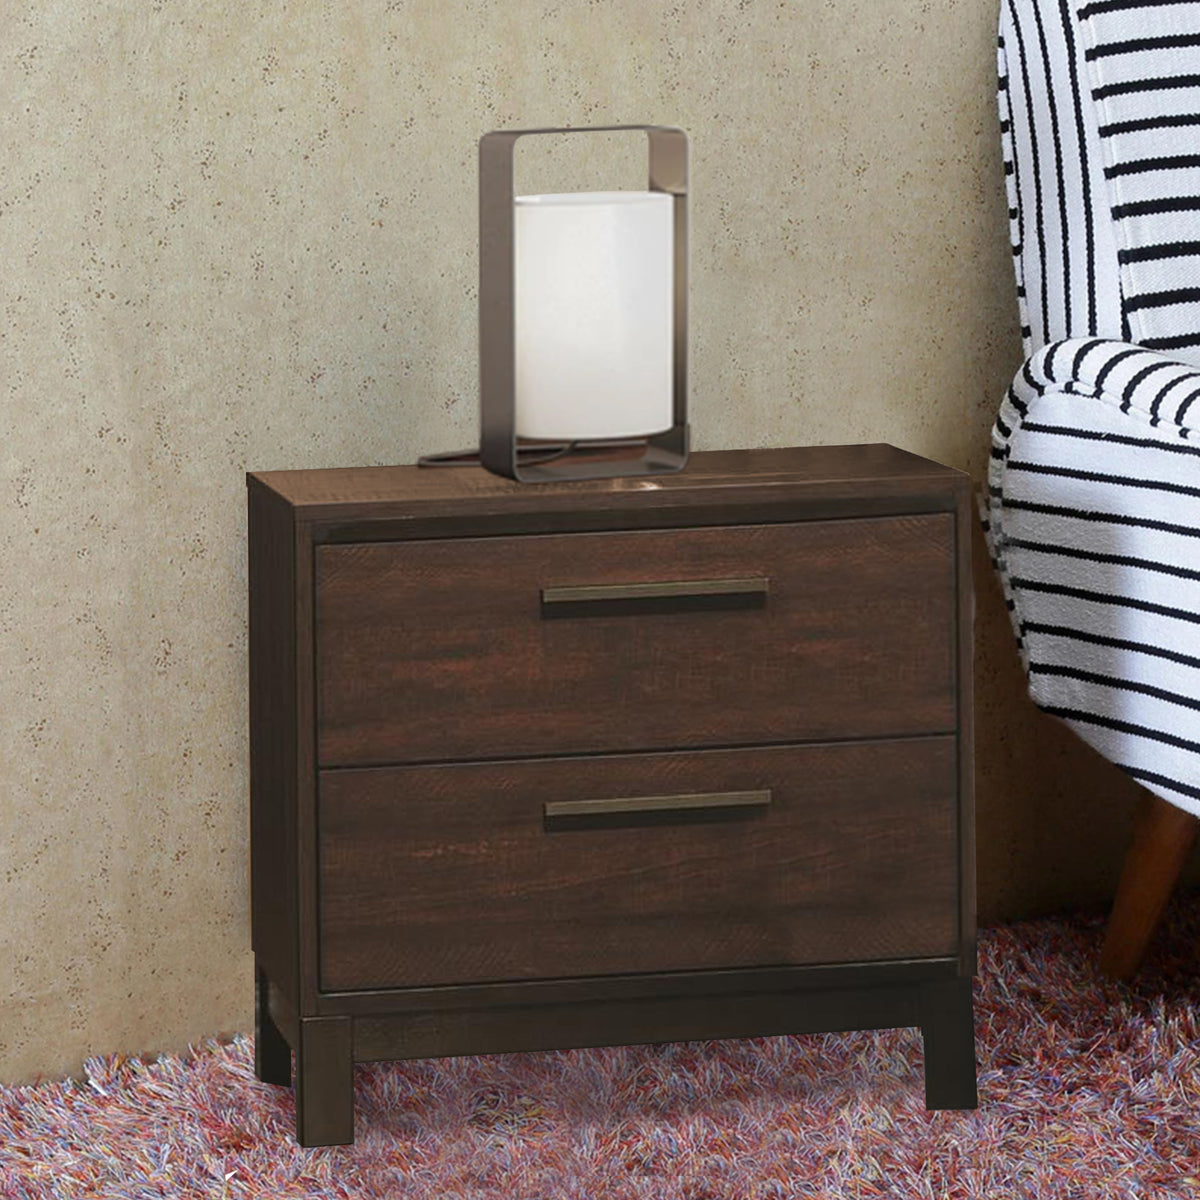 Wooden Nightstand with Two Drawers and Metal Bar Handles, Brown - BM185321